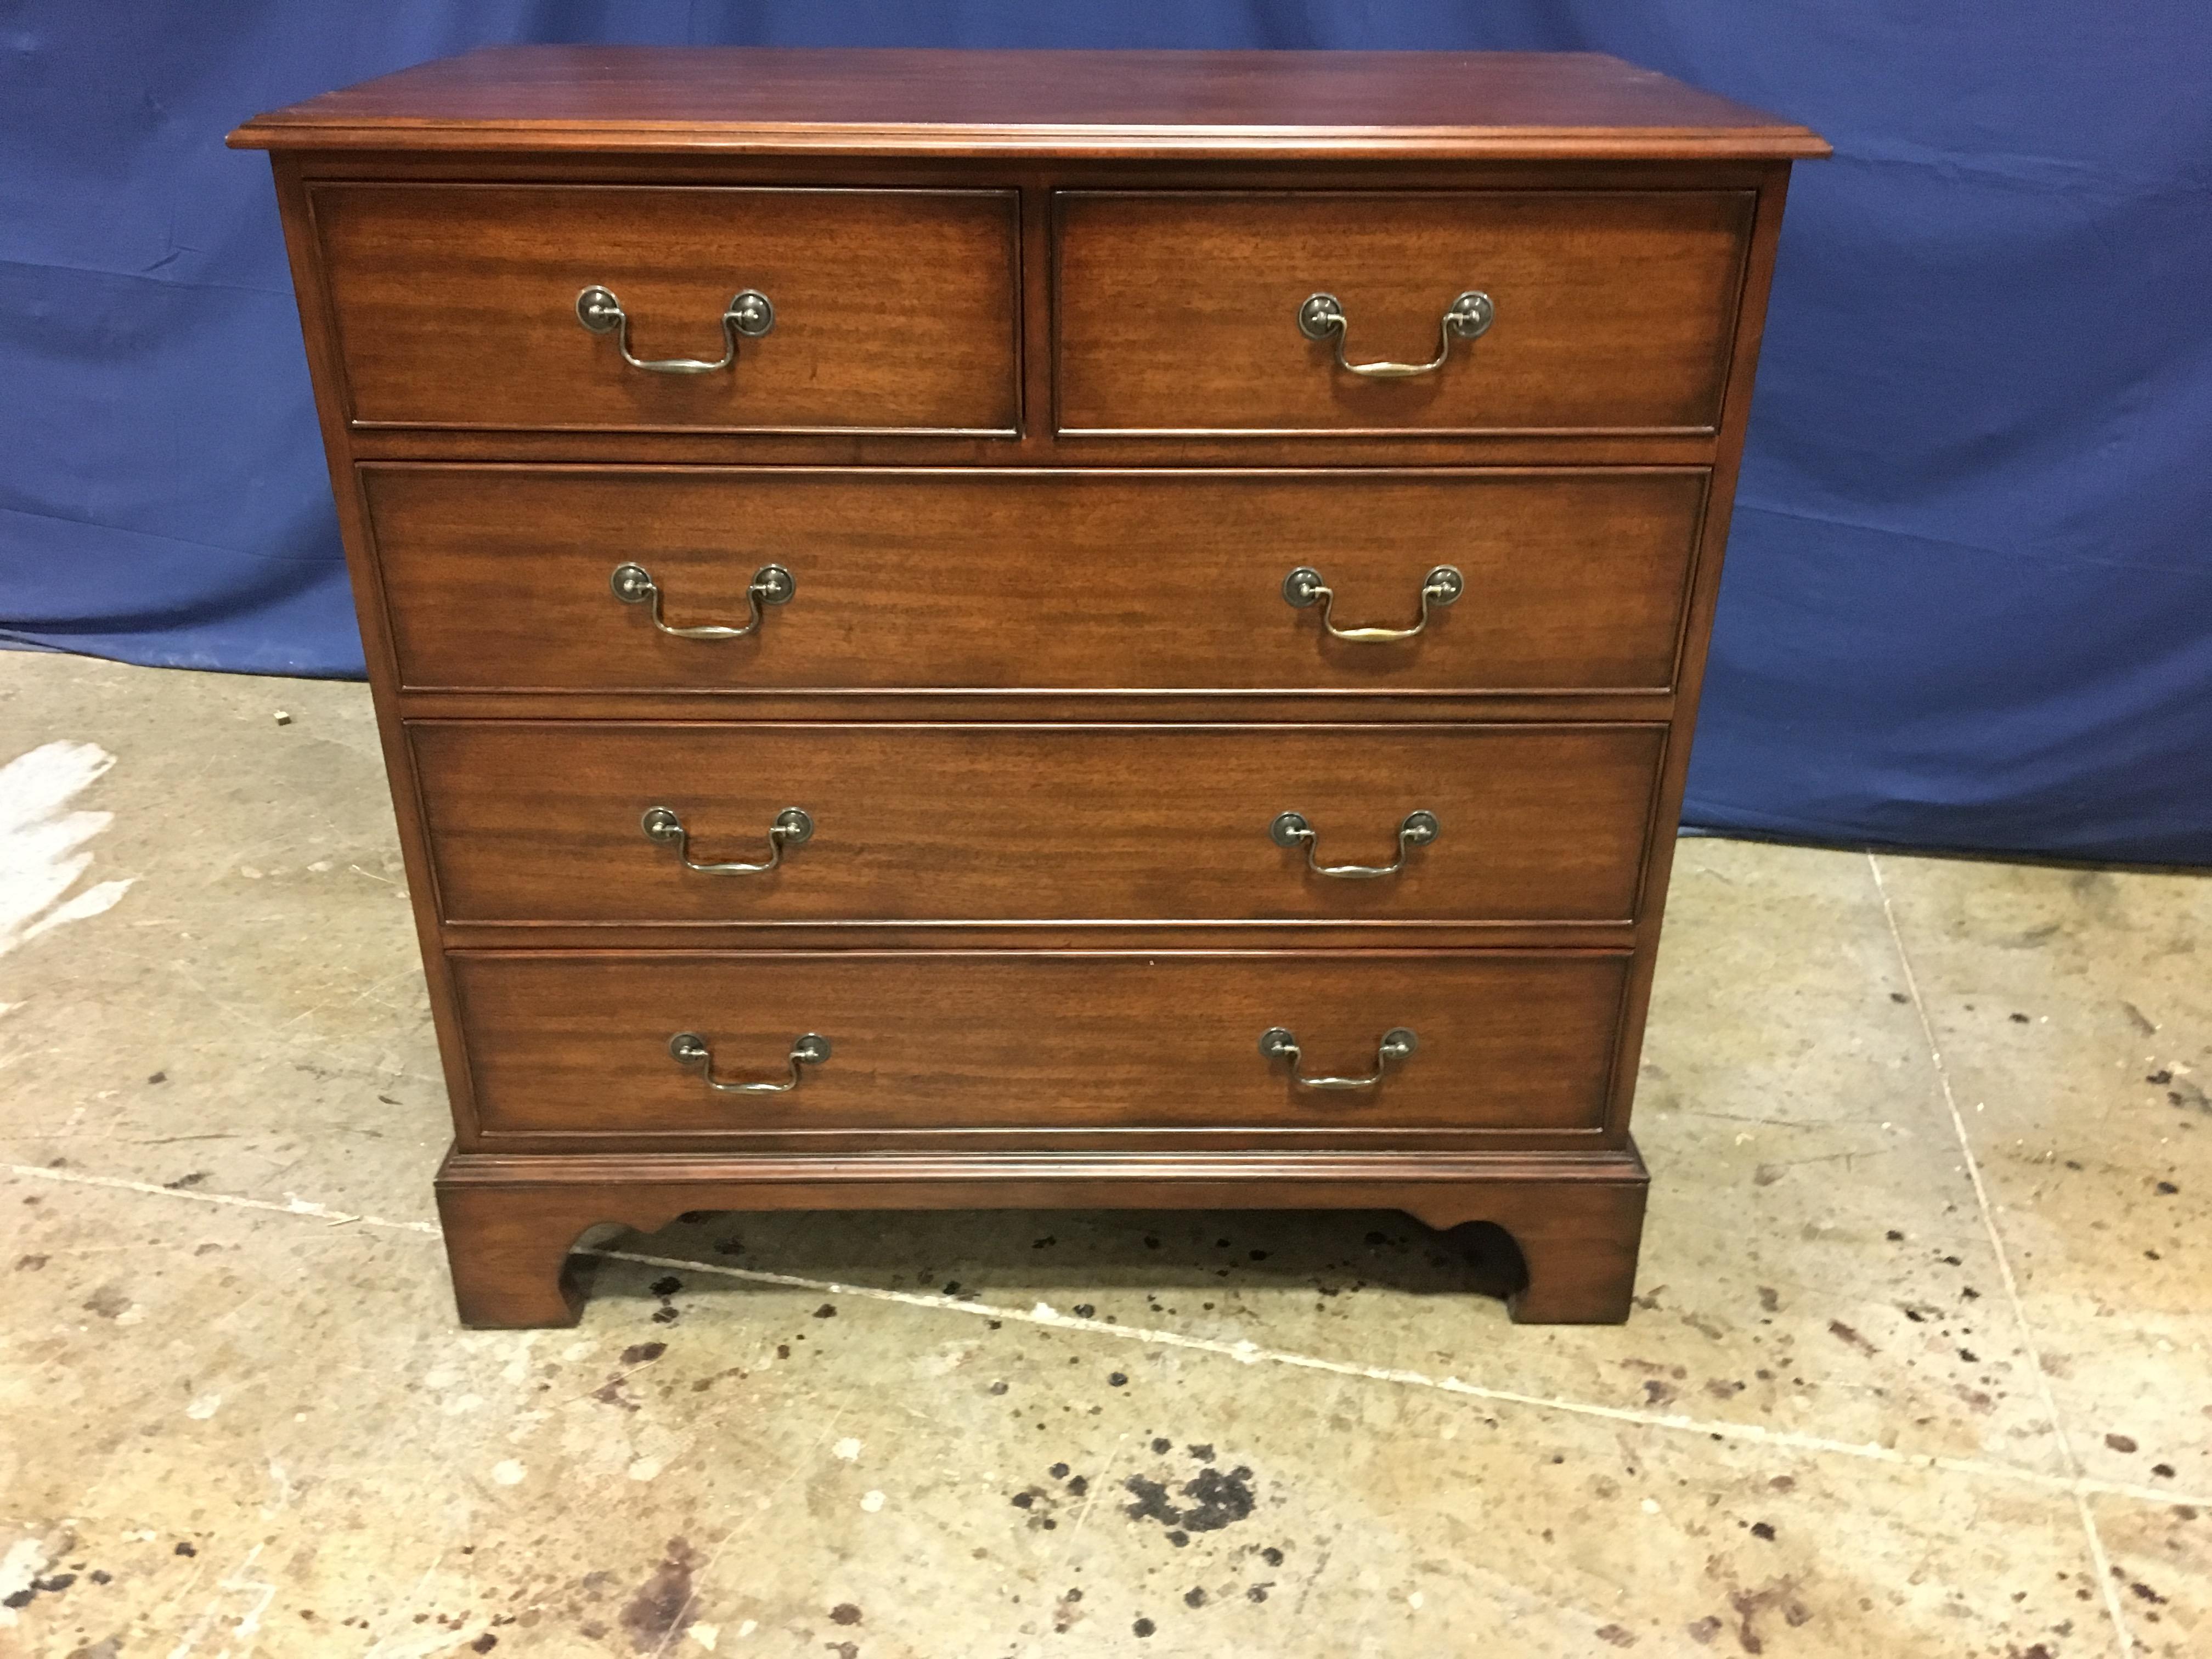 This is a new traditional mahogany bachelor’s chest/nightstand. Its design was inspired by New England chests in the 1800s. It features five drawers and straight grain mahogany drawer fronts, top and sides with a Classic solid mahogany ogee edge.